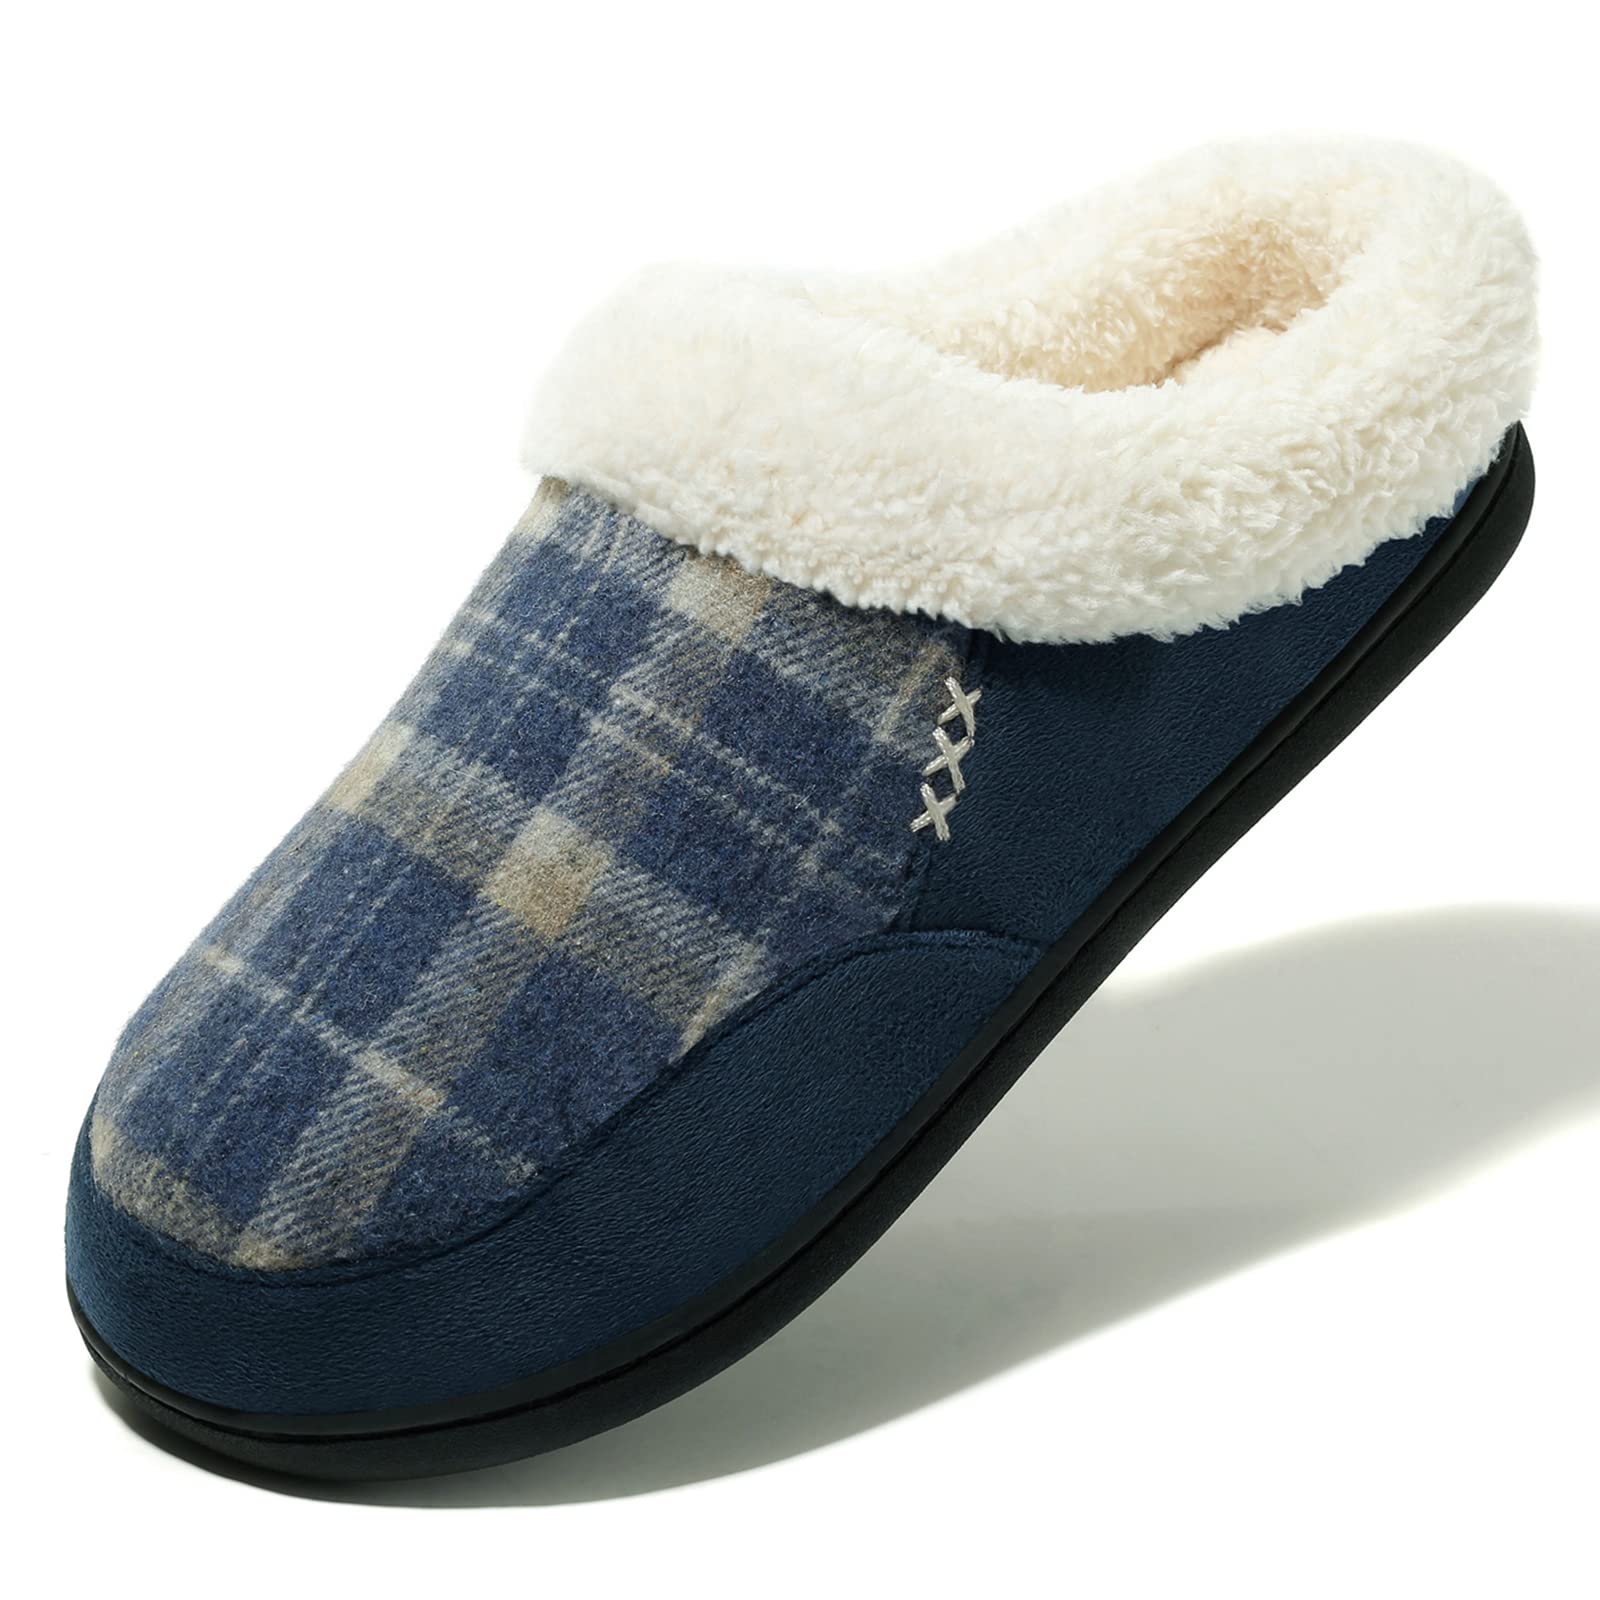 Newdenber Mens Cozy Memory Foam Slippers Plaid Soft Plush Fleece Lined Slip On Indoor Outdoor Clog House Shoes (15-16 D(M) Us, N